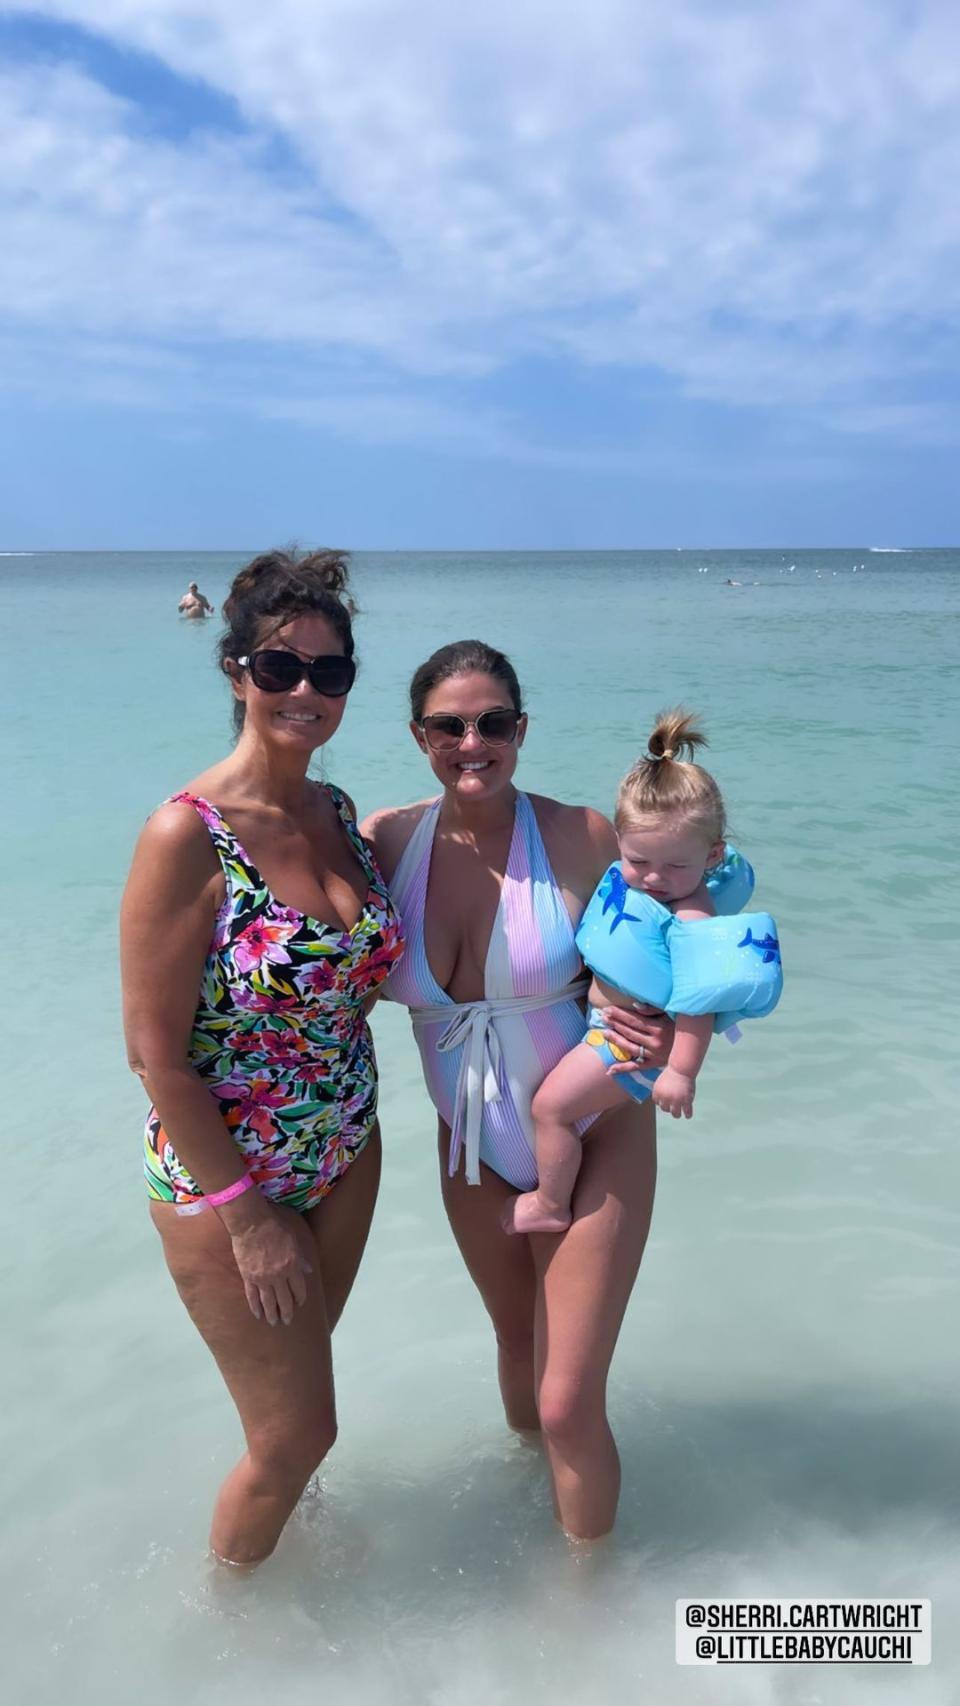 The Vanderpump Rules alum posed with her mom, Sherri Cartwright, and her son, Cruz, during an April 2022 beach trip.